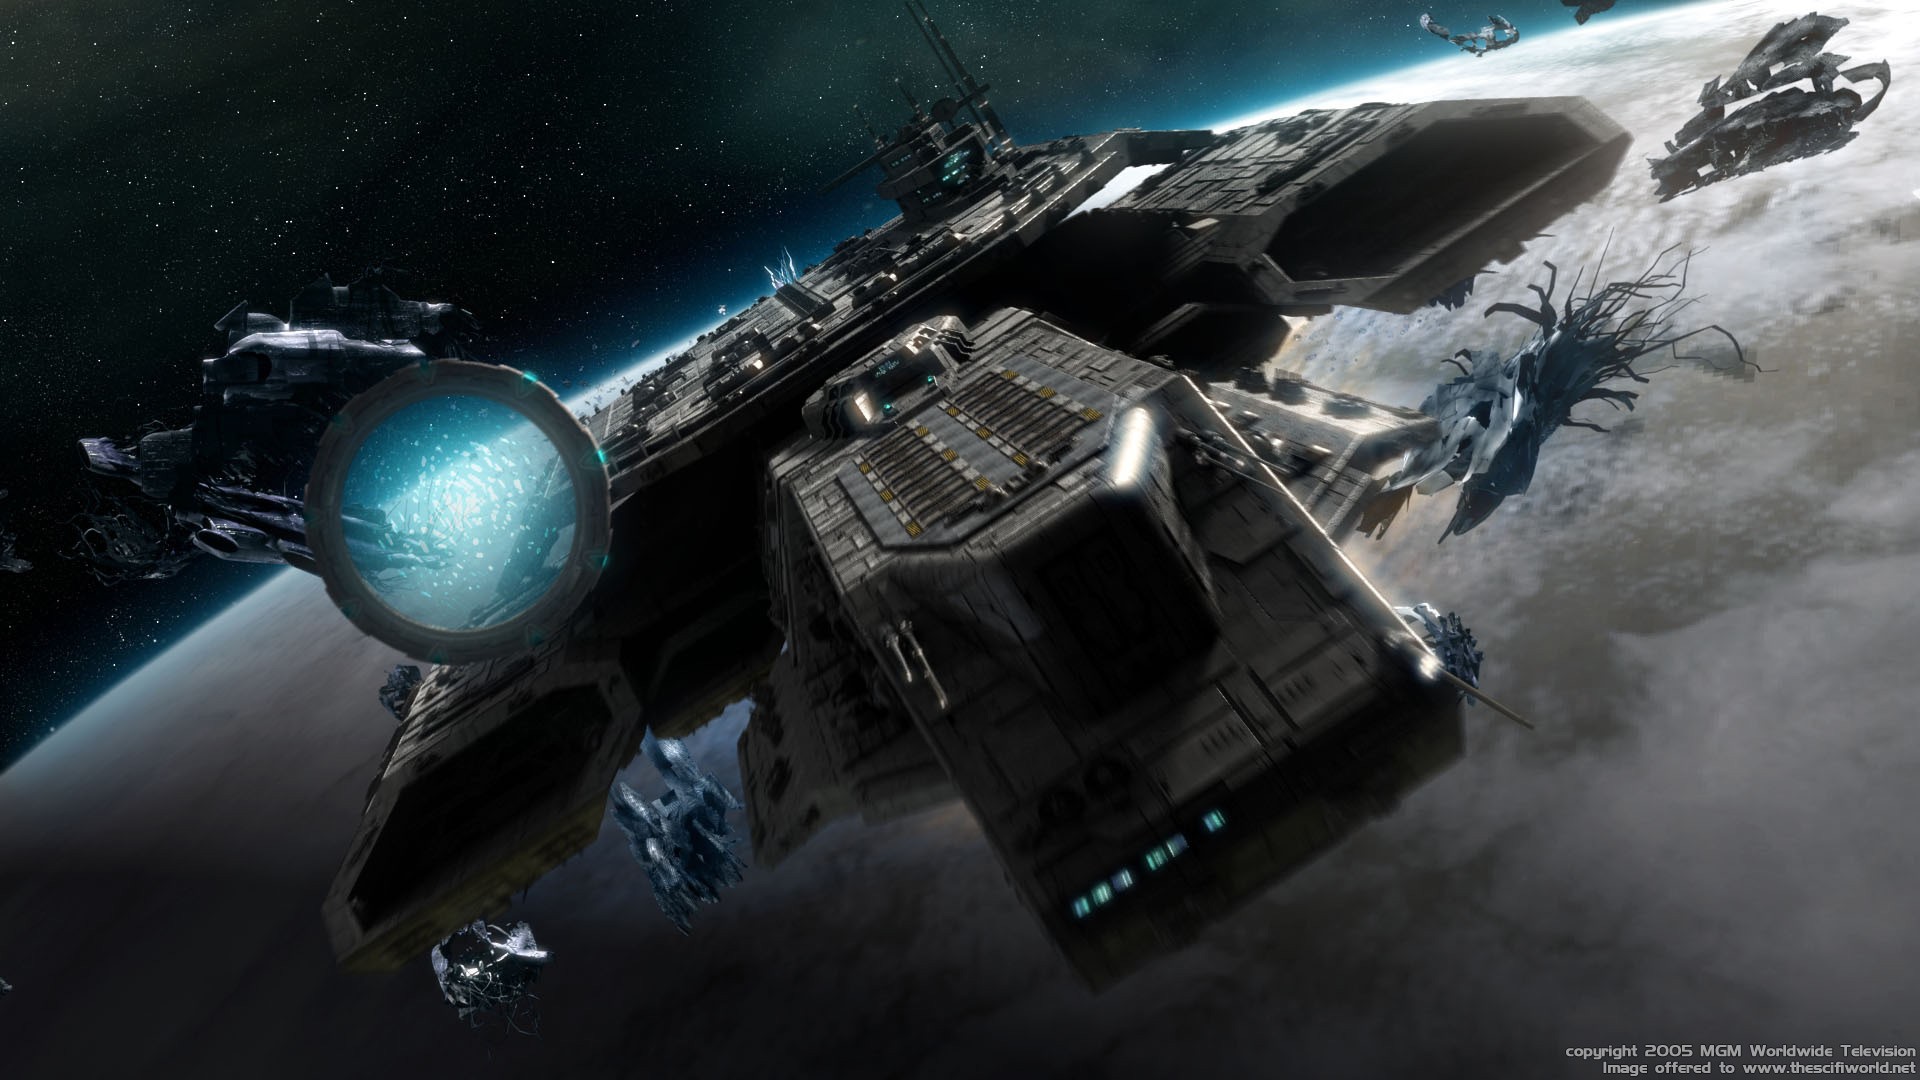 General 1920x1080 Stargate Daedalus-class space battle space science fiction TV series spaceship 2005 (Year)